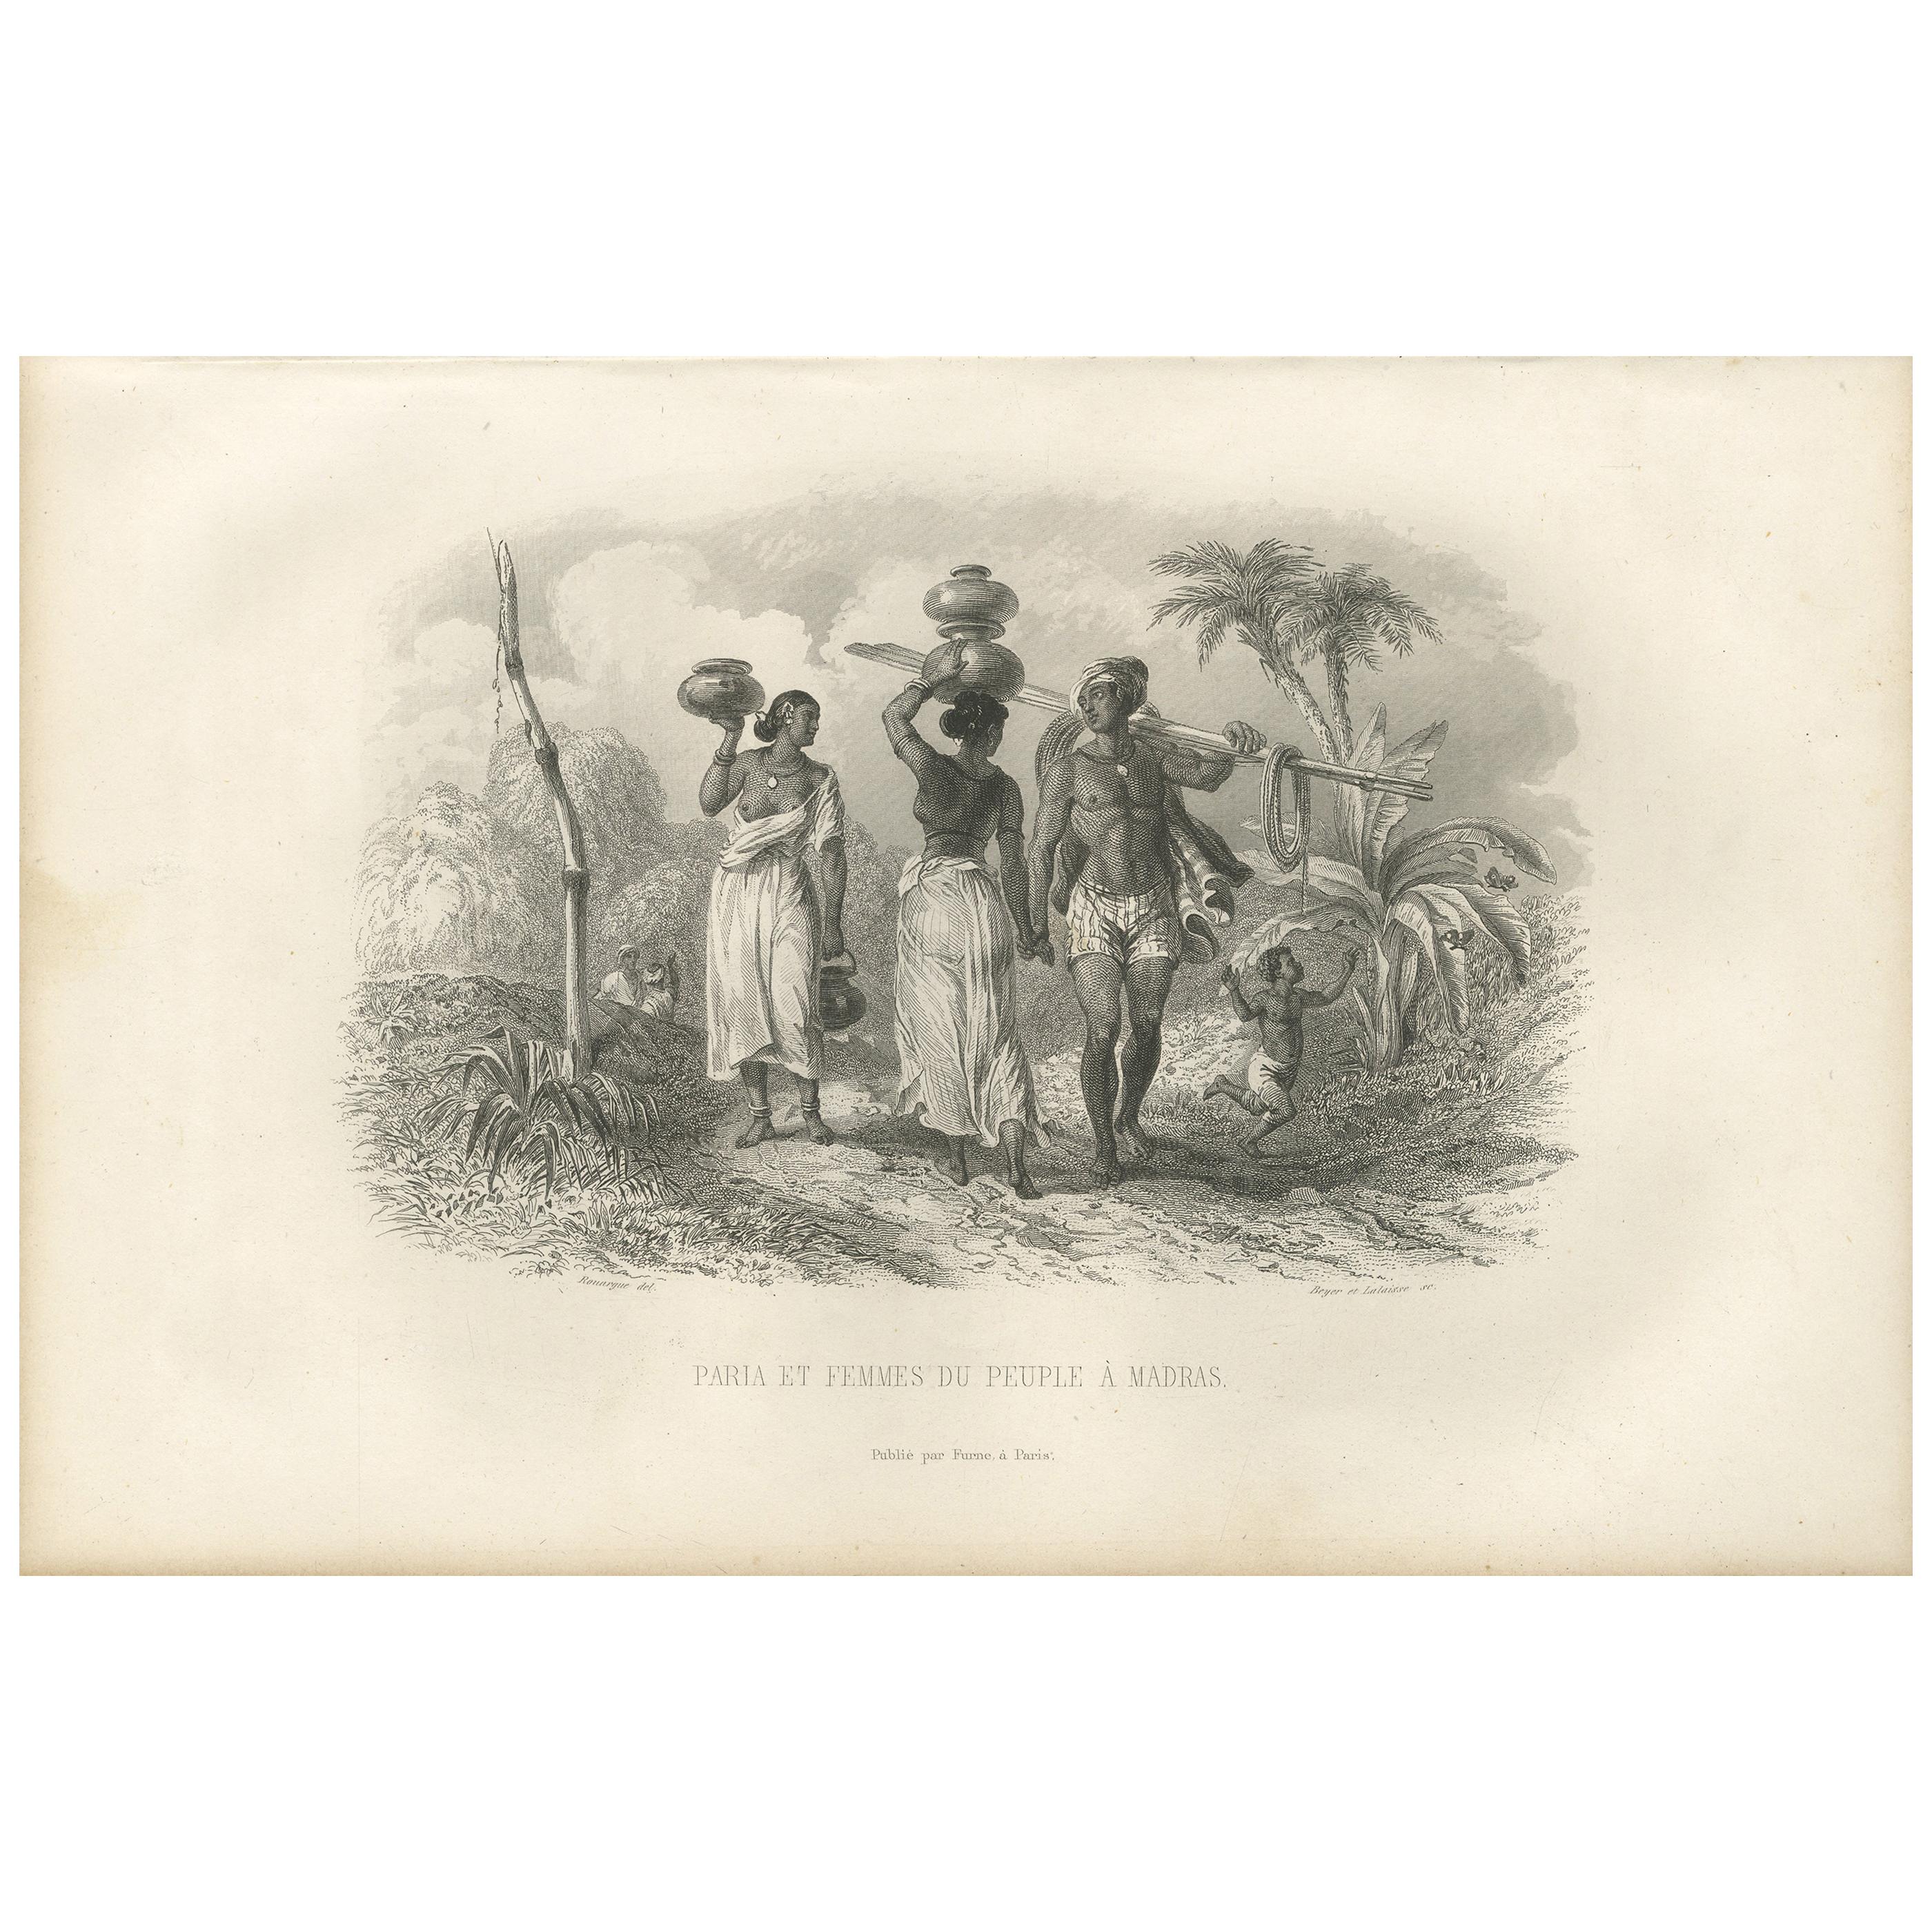 Antique Print of Natives from Madras in India, '1853'